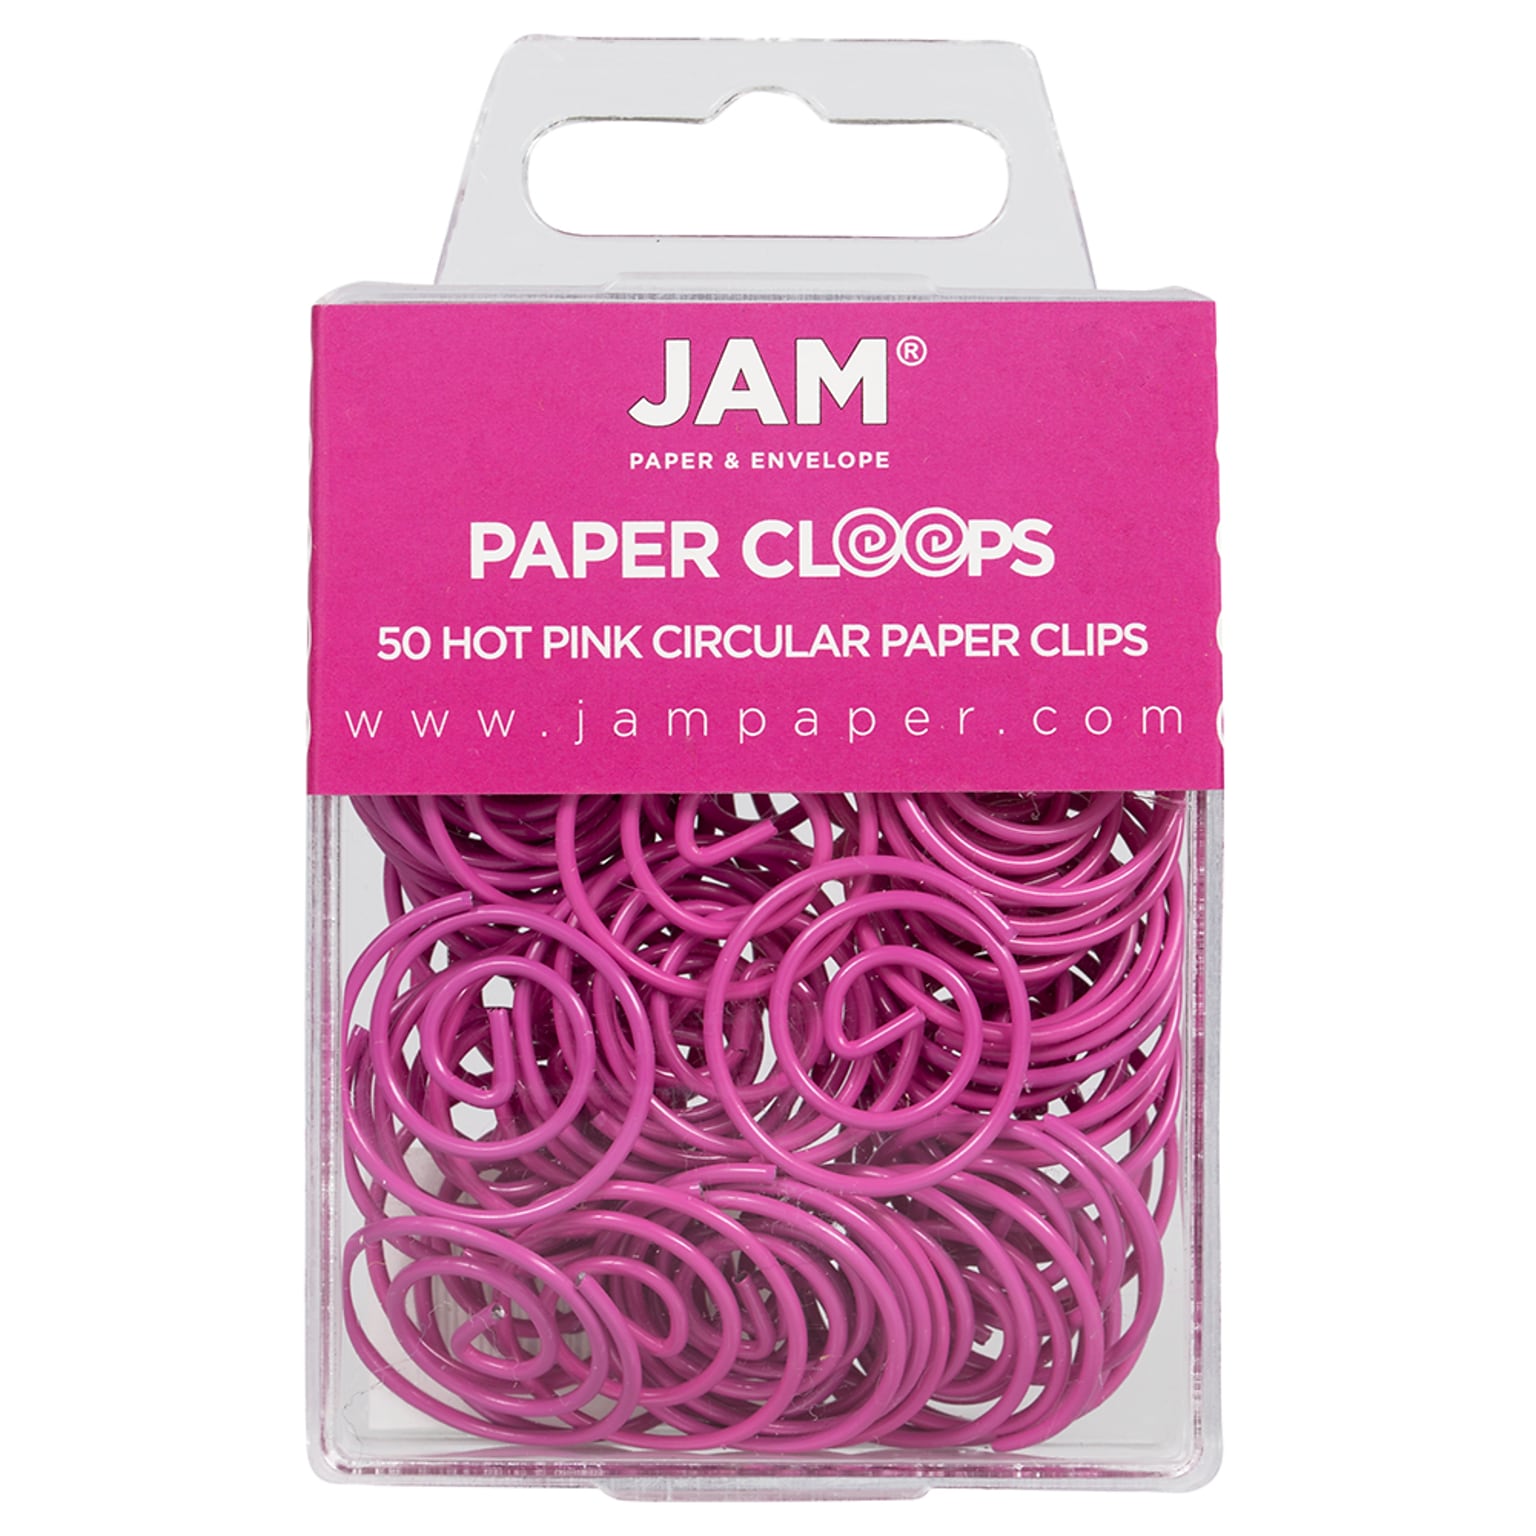 JAM Paper Colored Circular Paper Clips, Round Paperclips, Hot Pink Fuchsia, 50/Pack (2187136)